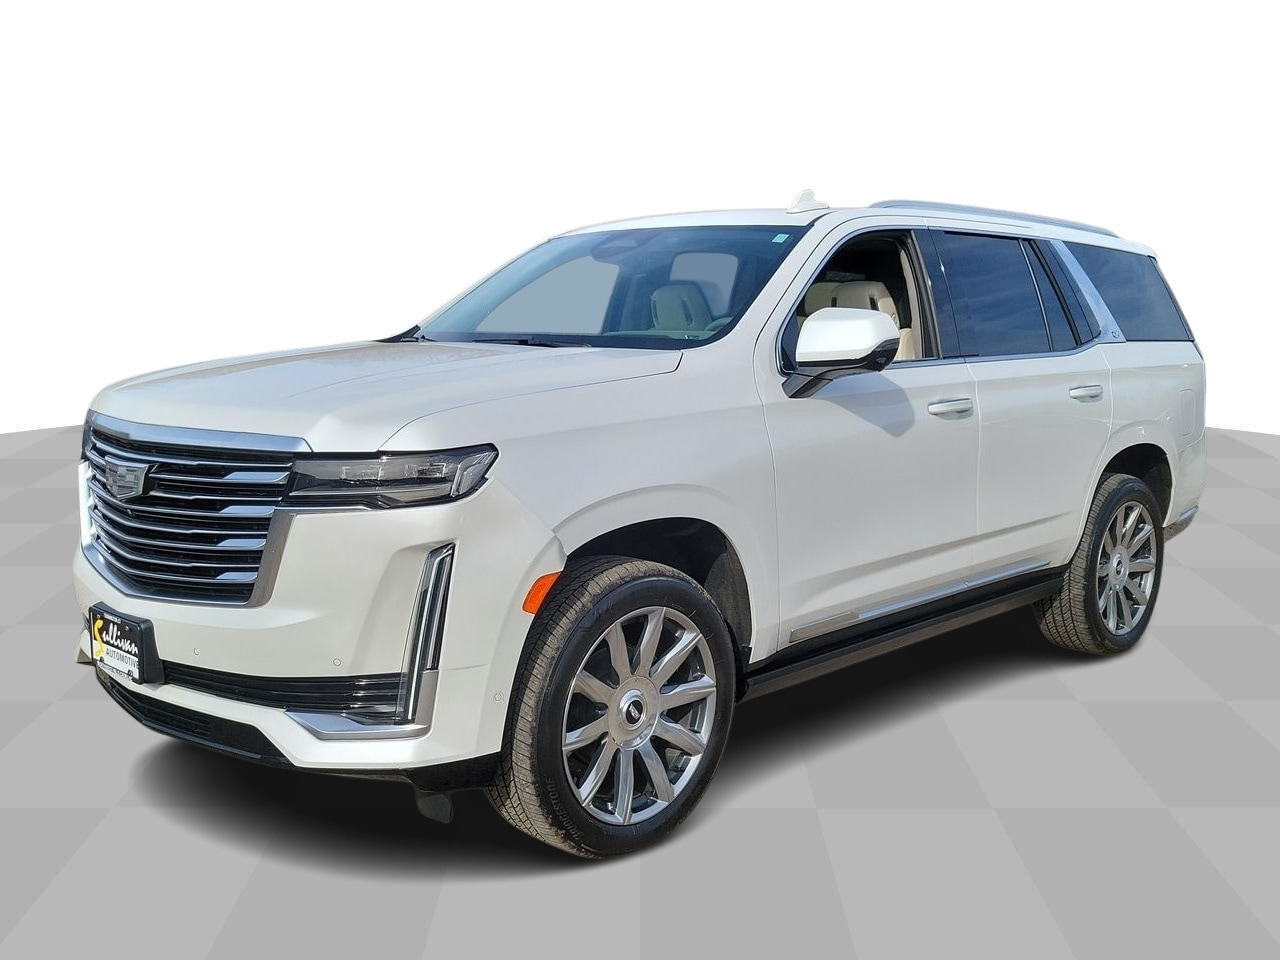 Used 2021 CADILLAC Escalade For Sale in Torrington